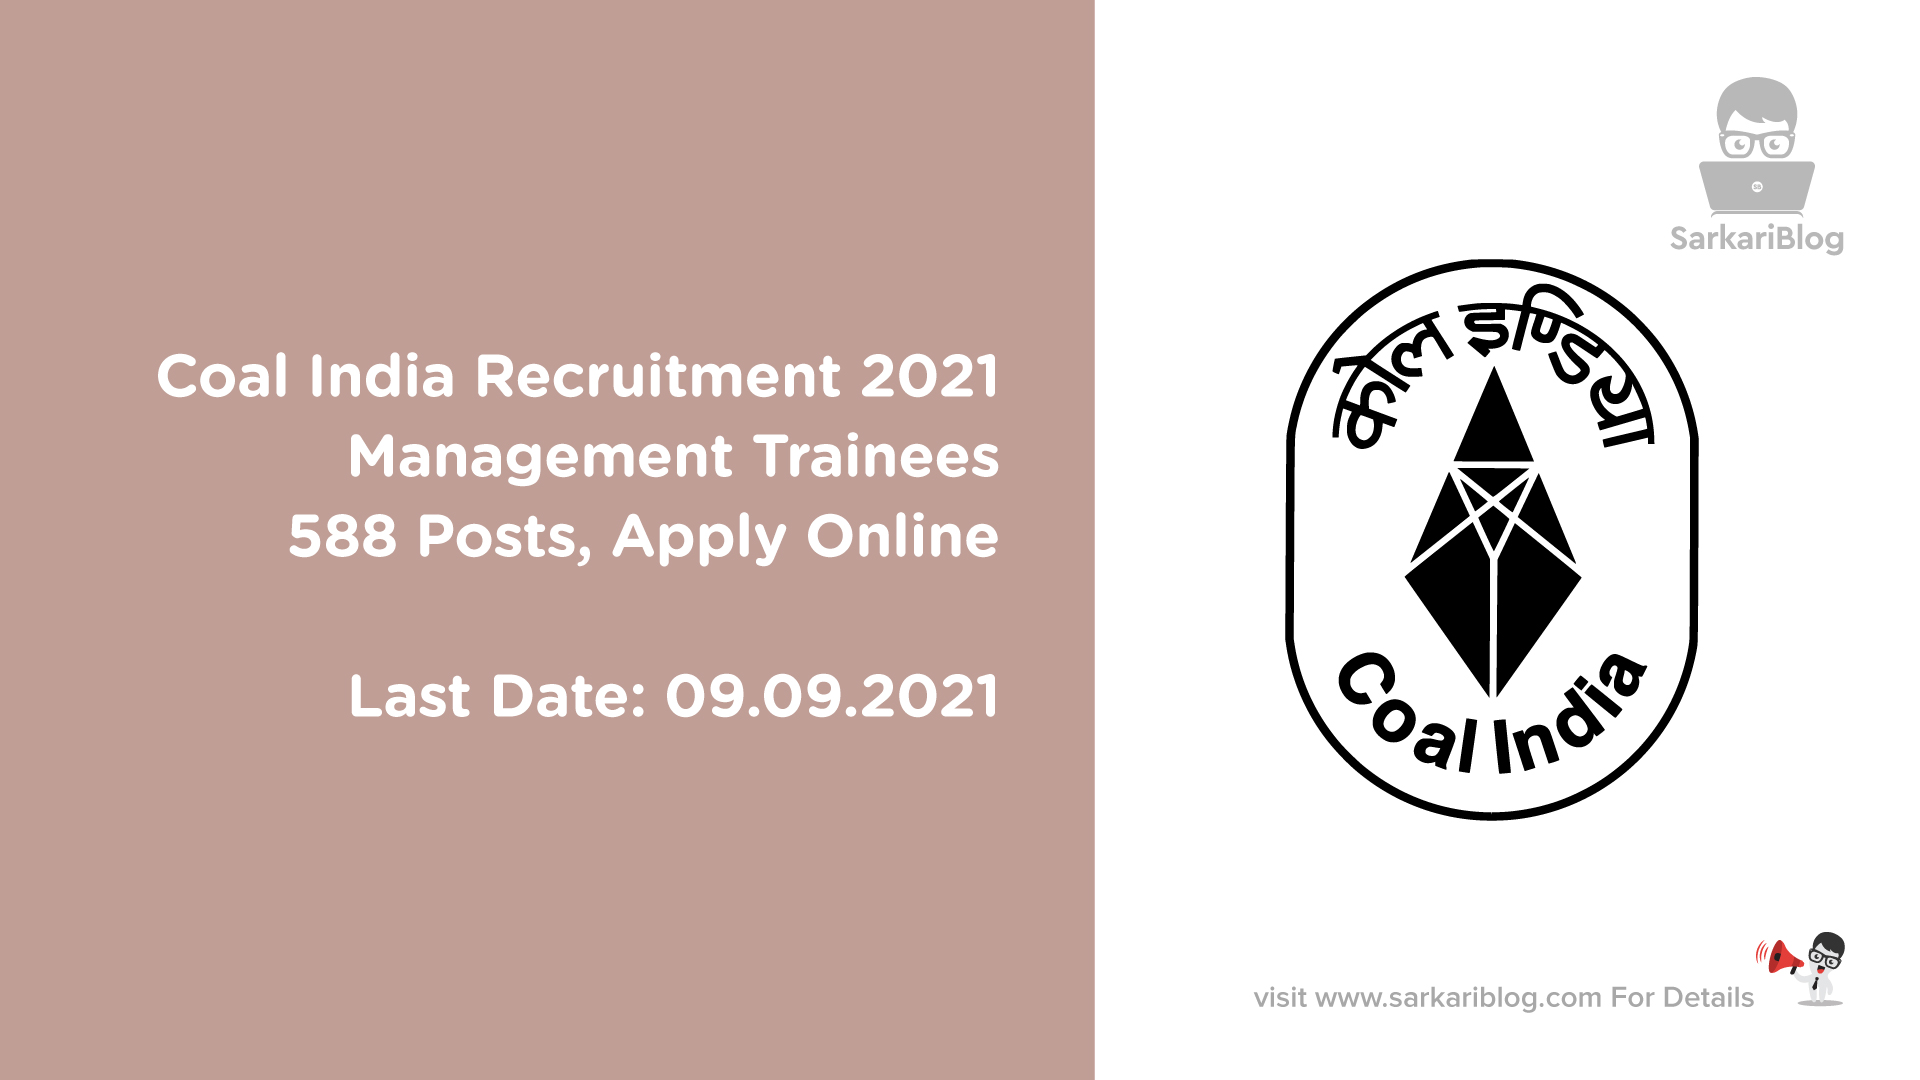 Coal India Recruitment 2021 - Management Trainees, 588 Posts, Apply Online